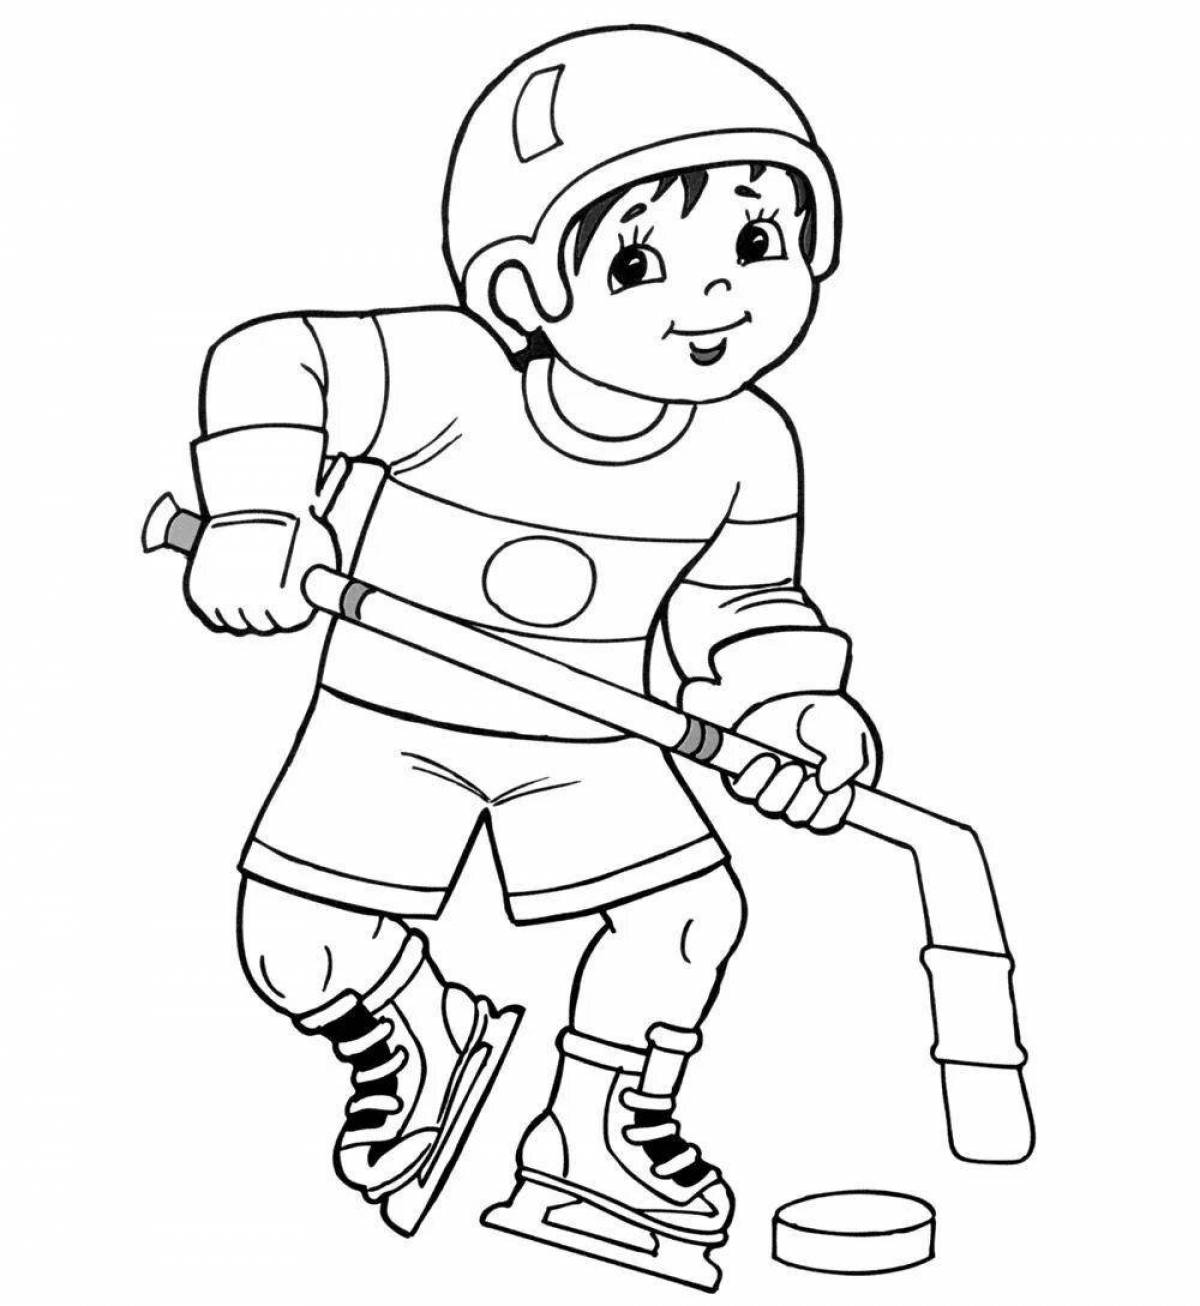 Beautiful winter sports coloring page for kids